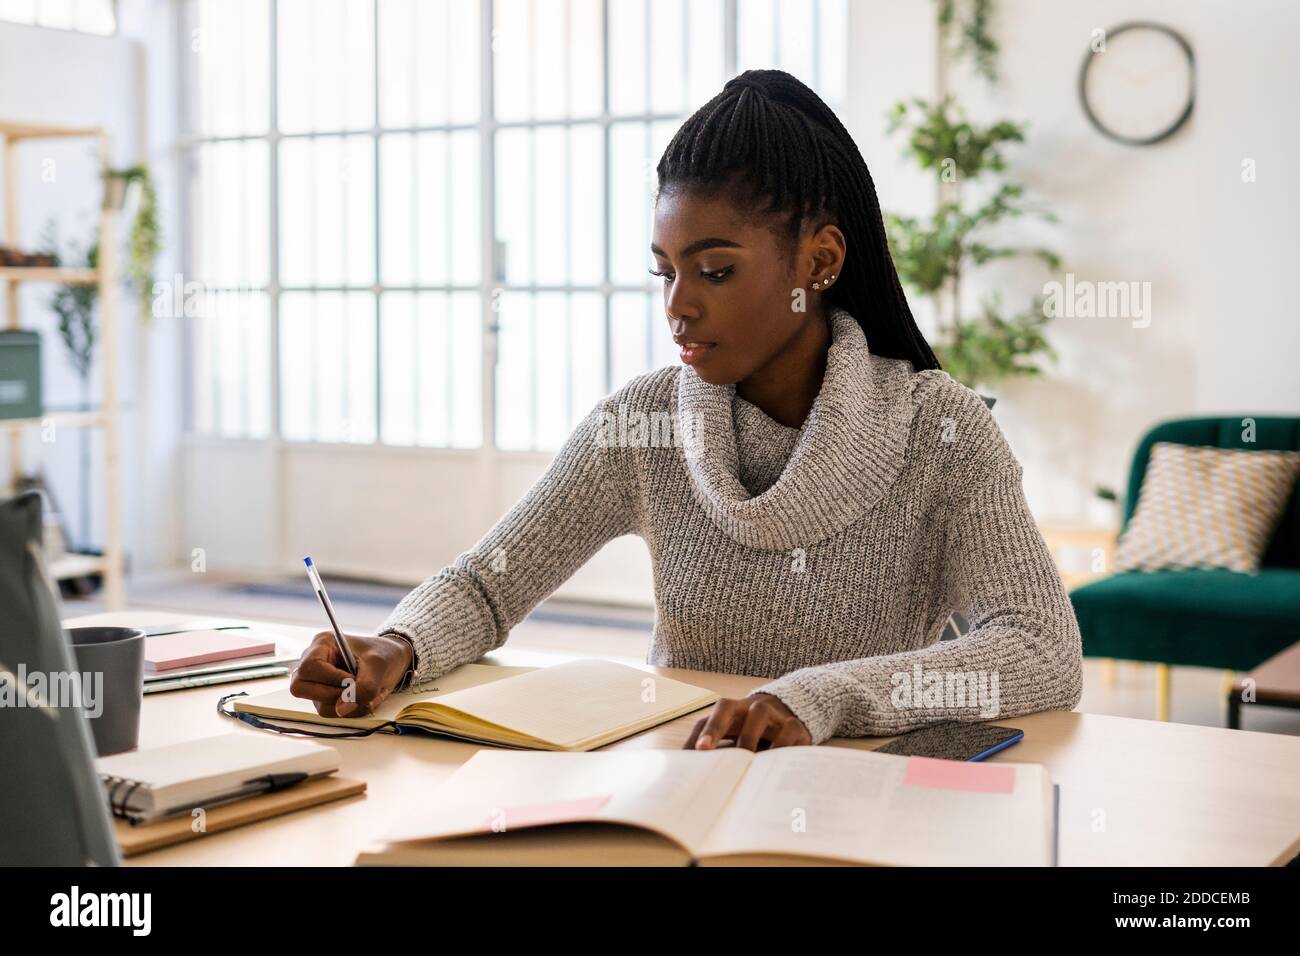 Female student writing in book on table while sitting at home Stock Photo